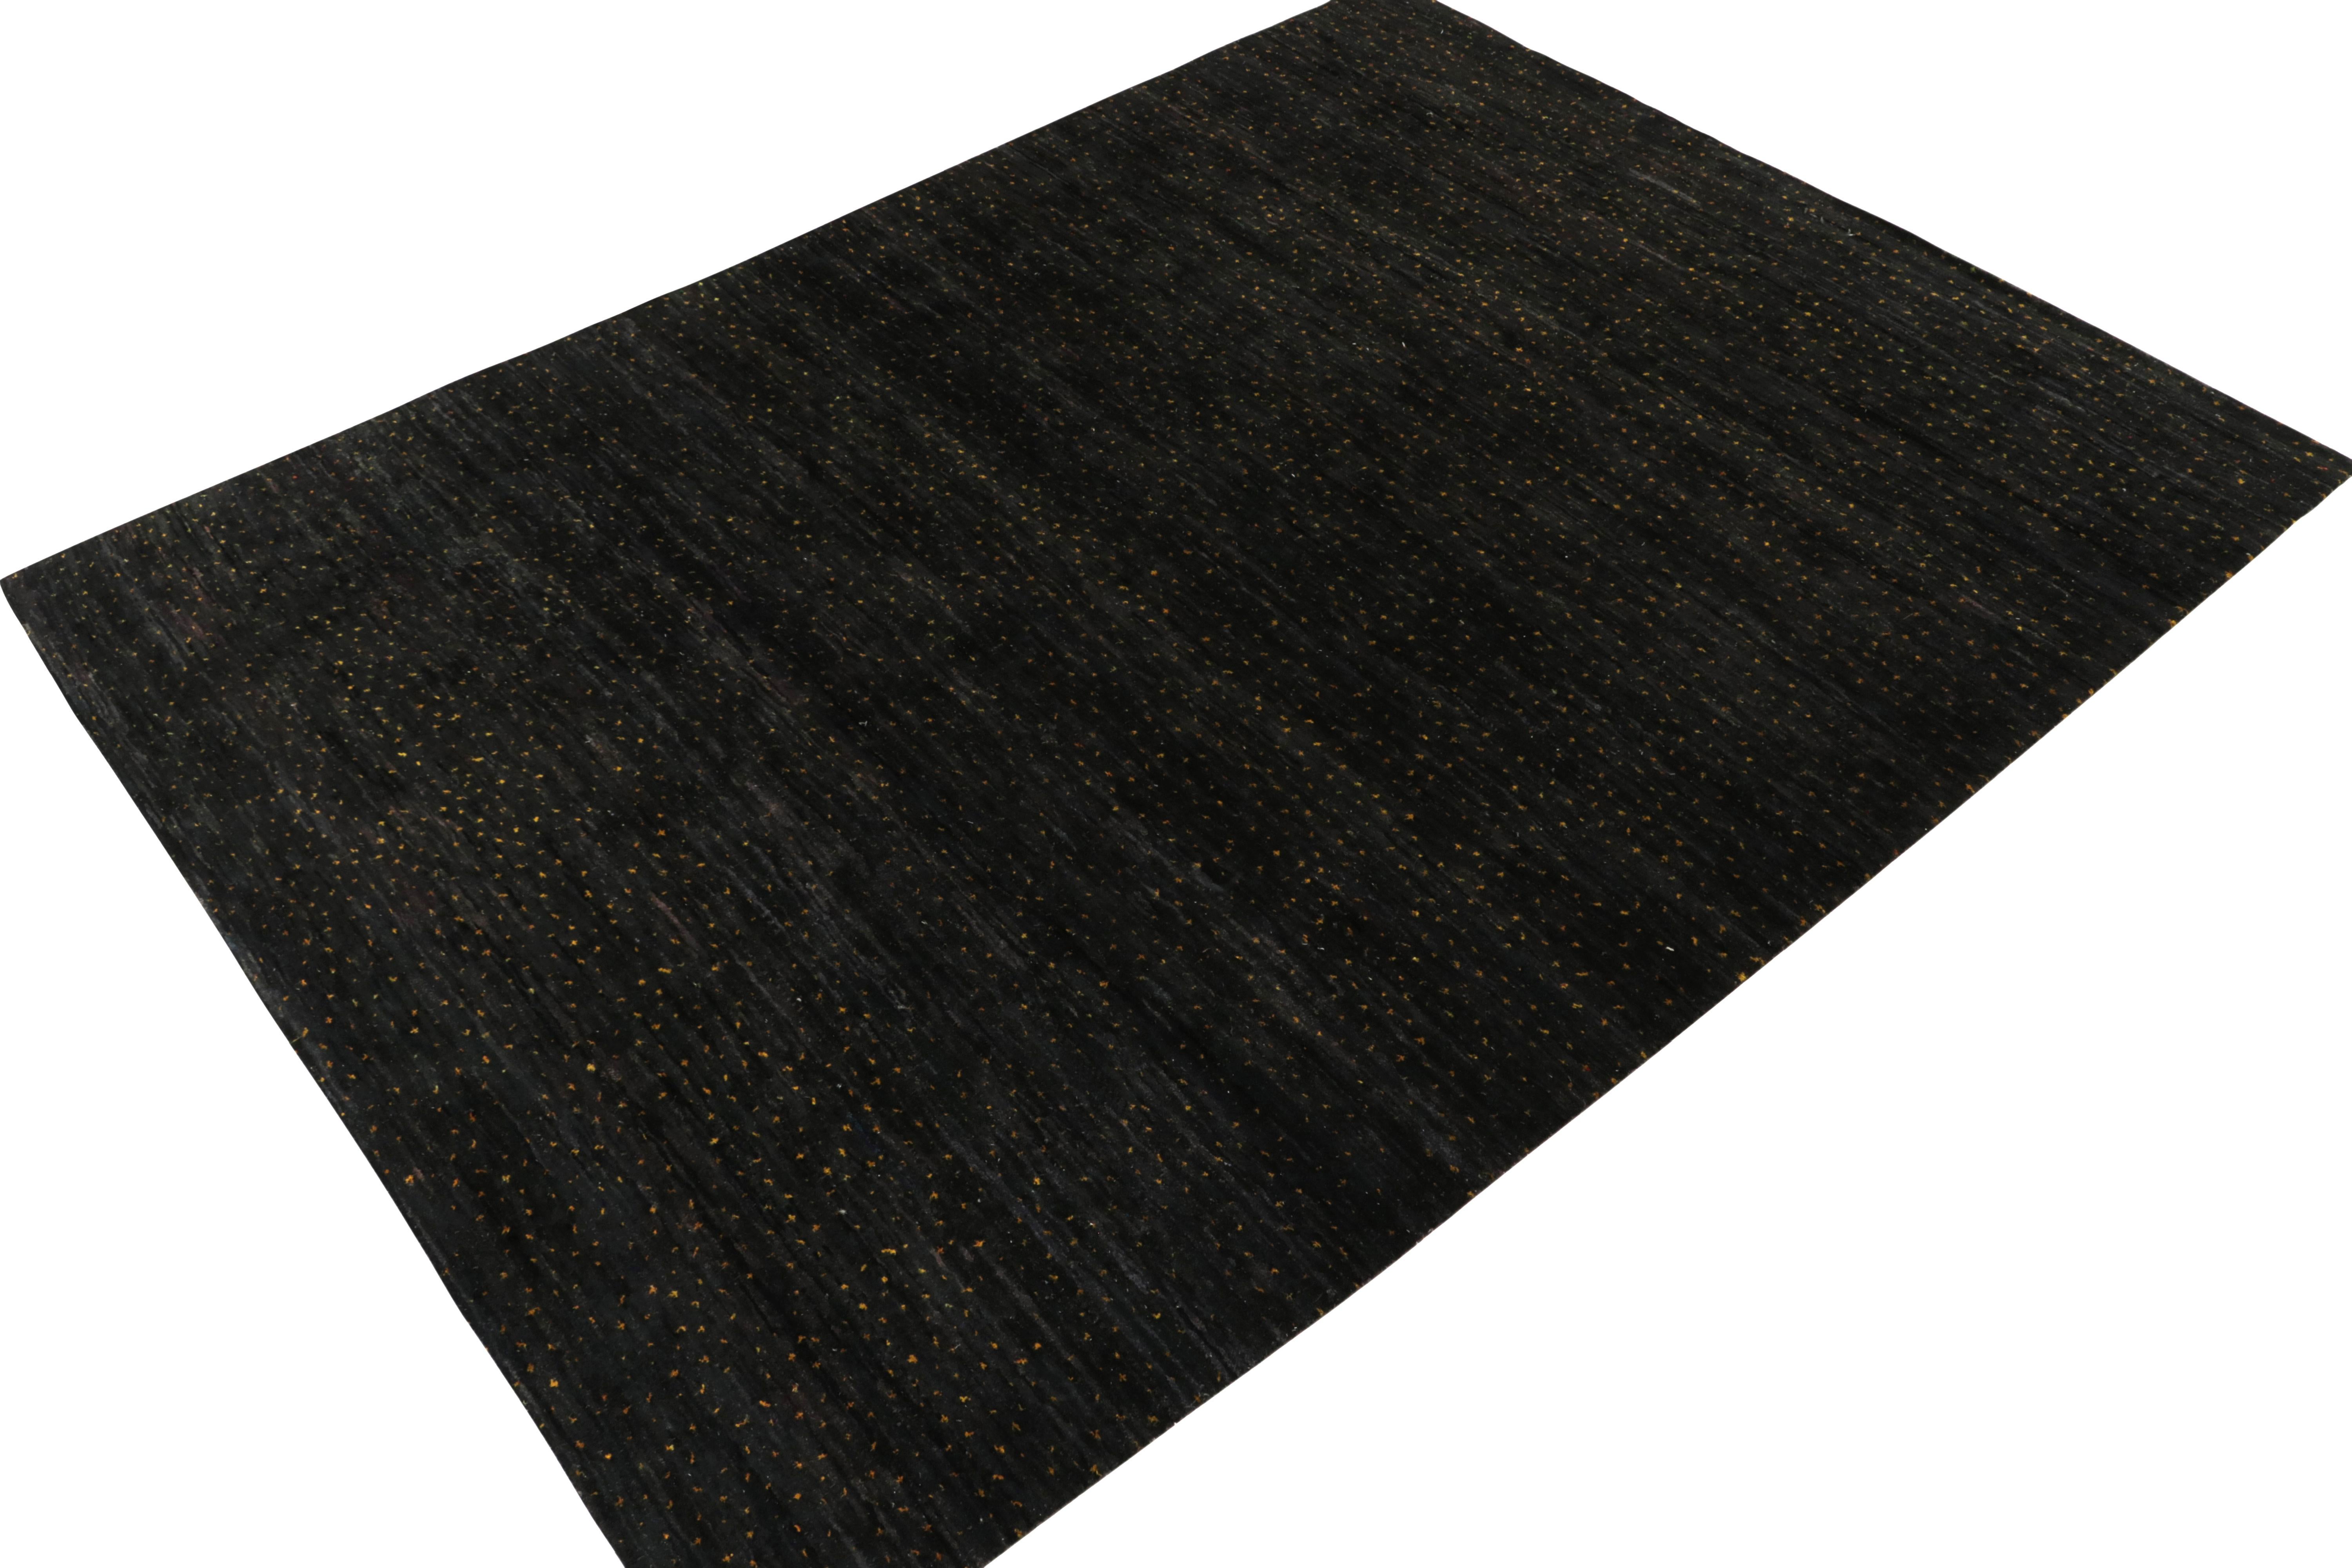 Indian Rug & Kilim’s Contemporary Rug in Black with Gold Dots Pattern For Sale